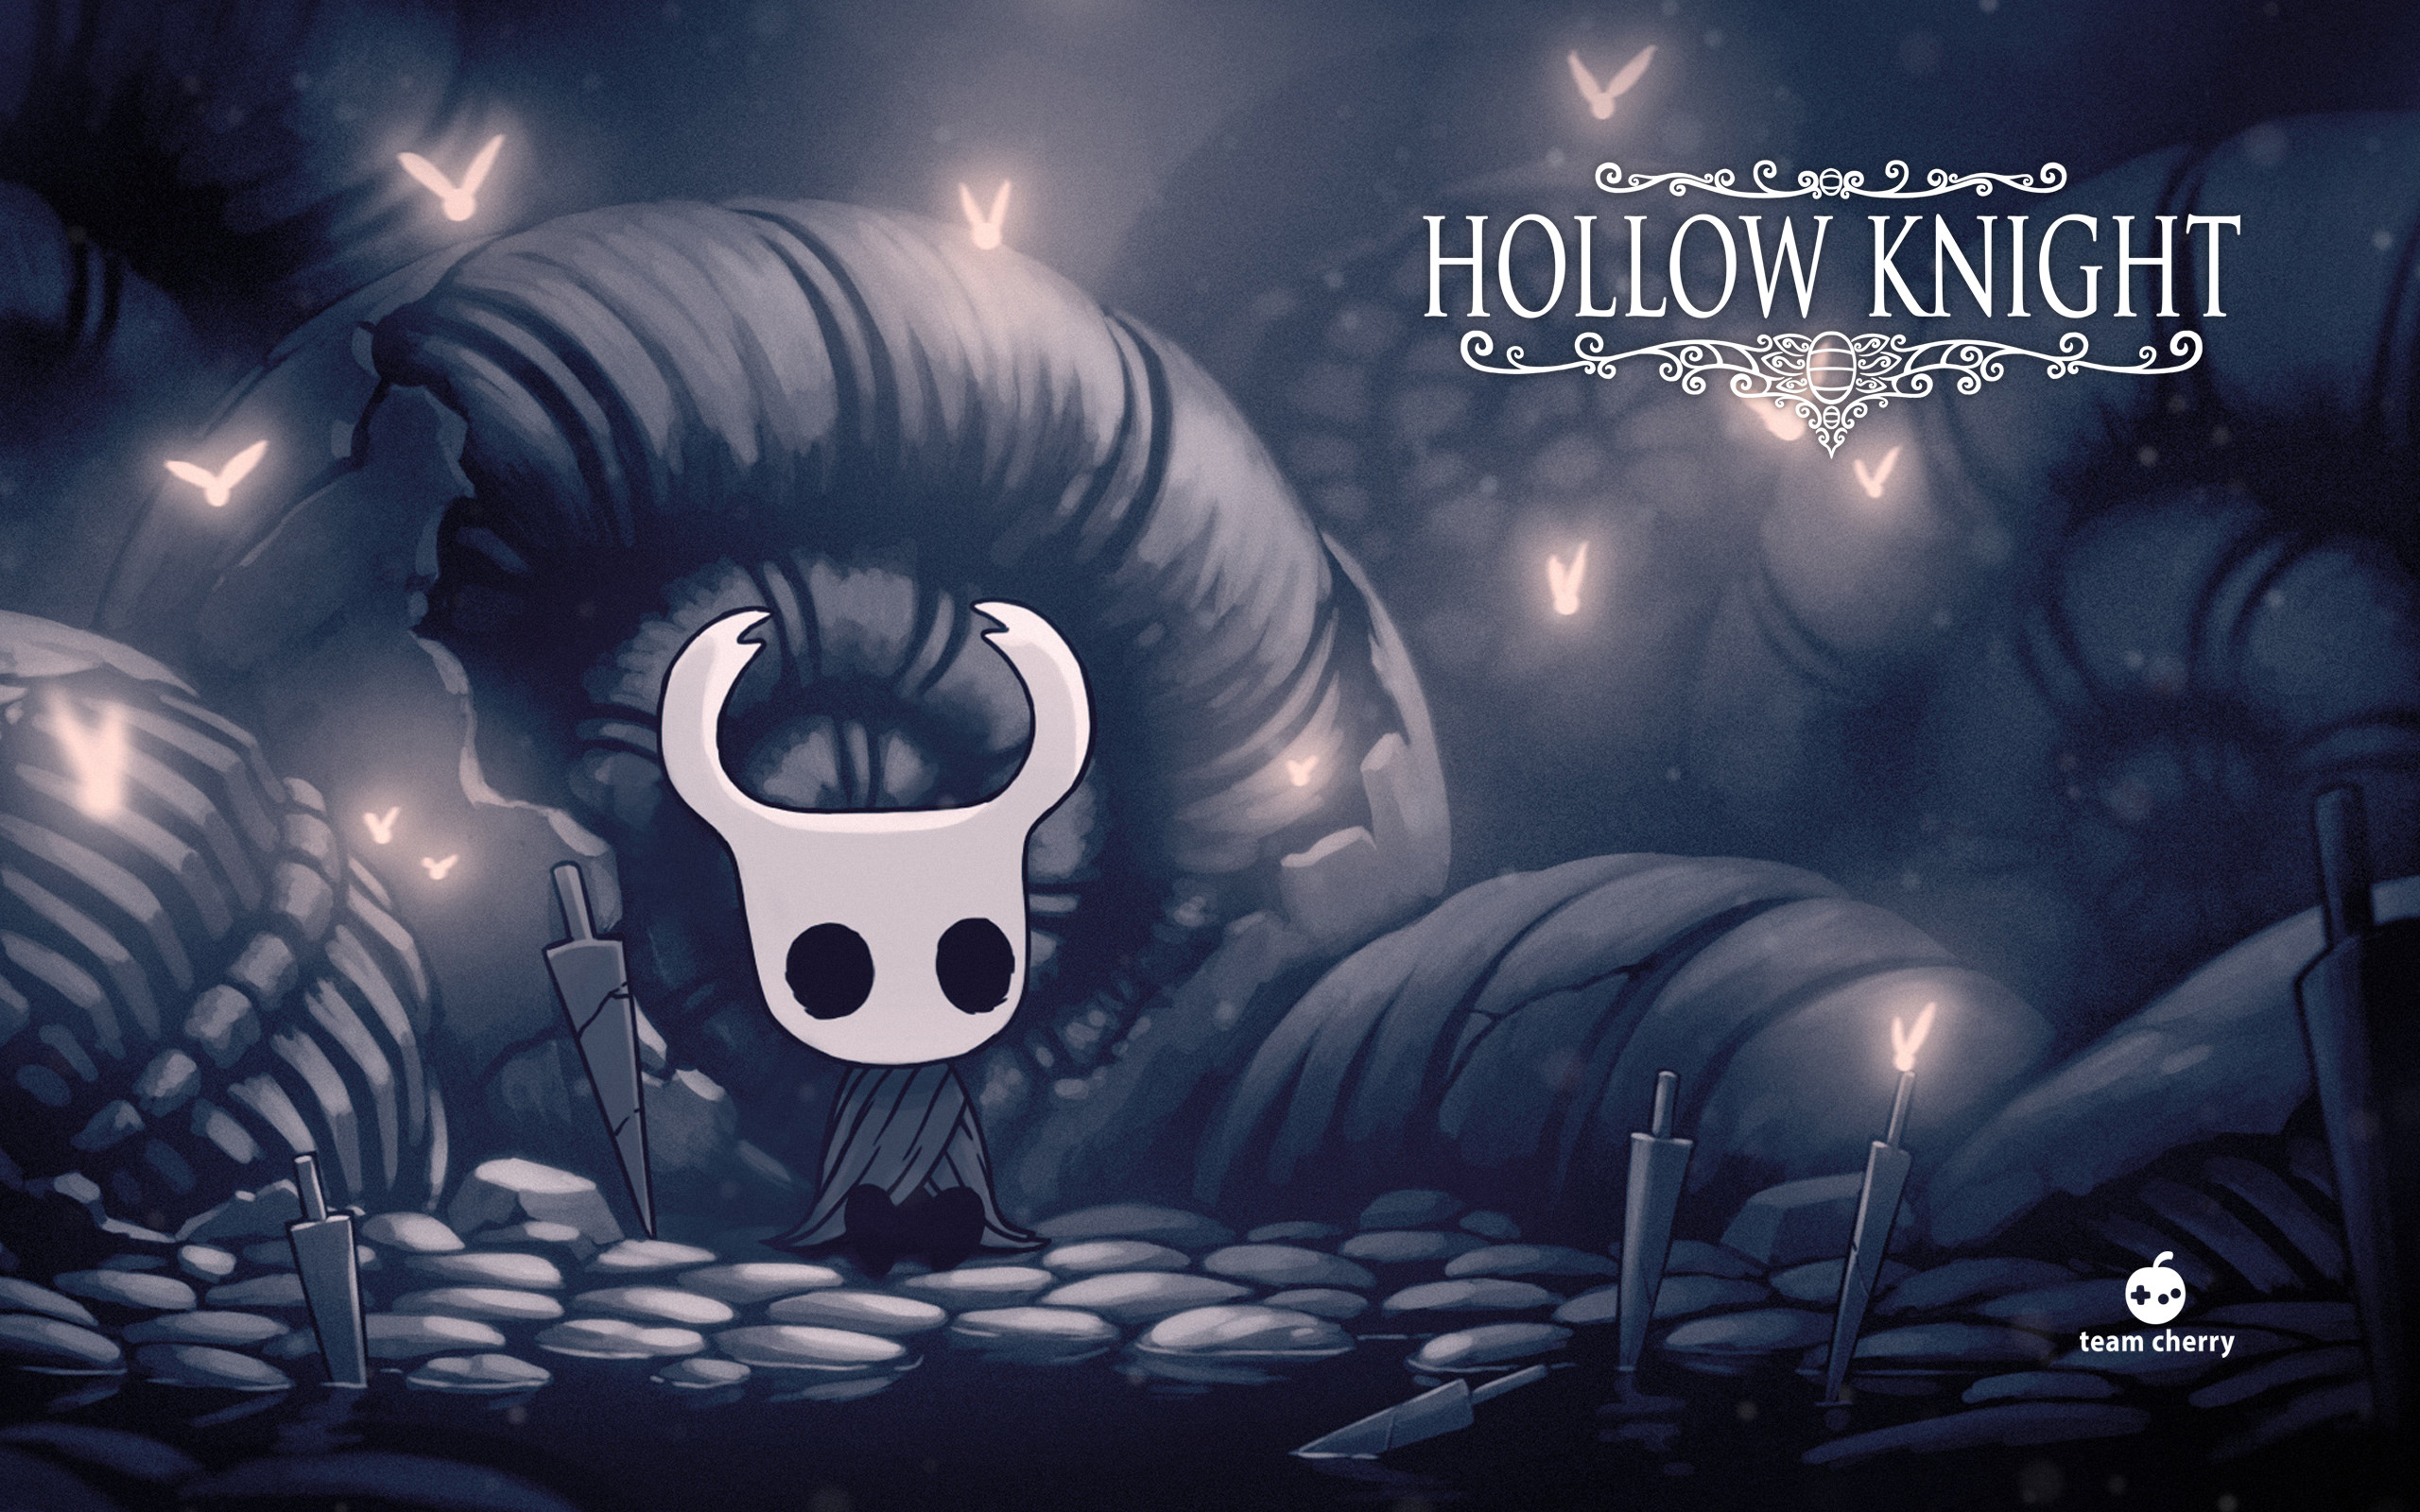 Hollow Knight Wallpaper Discover more 1080p 1440p android desktop  background fanart wallpaper httpswww  Desktop wallpapers backgrounds  Knight Wallpaper